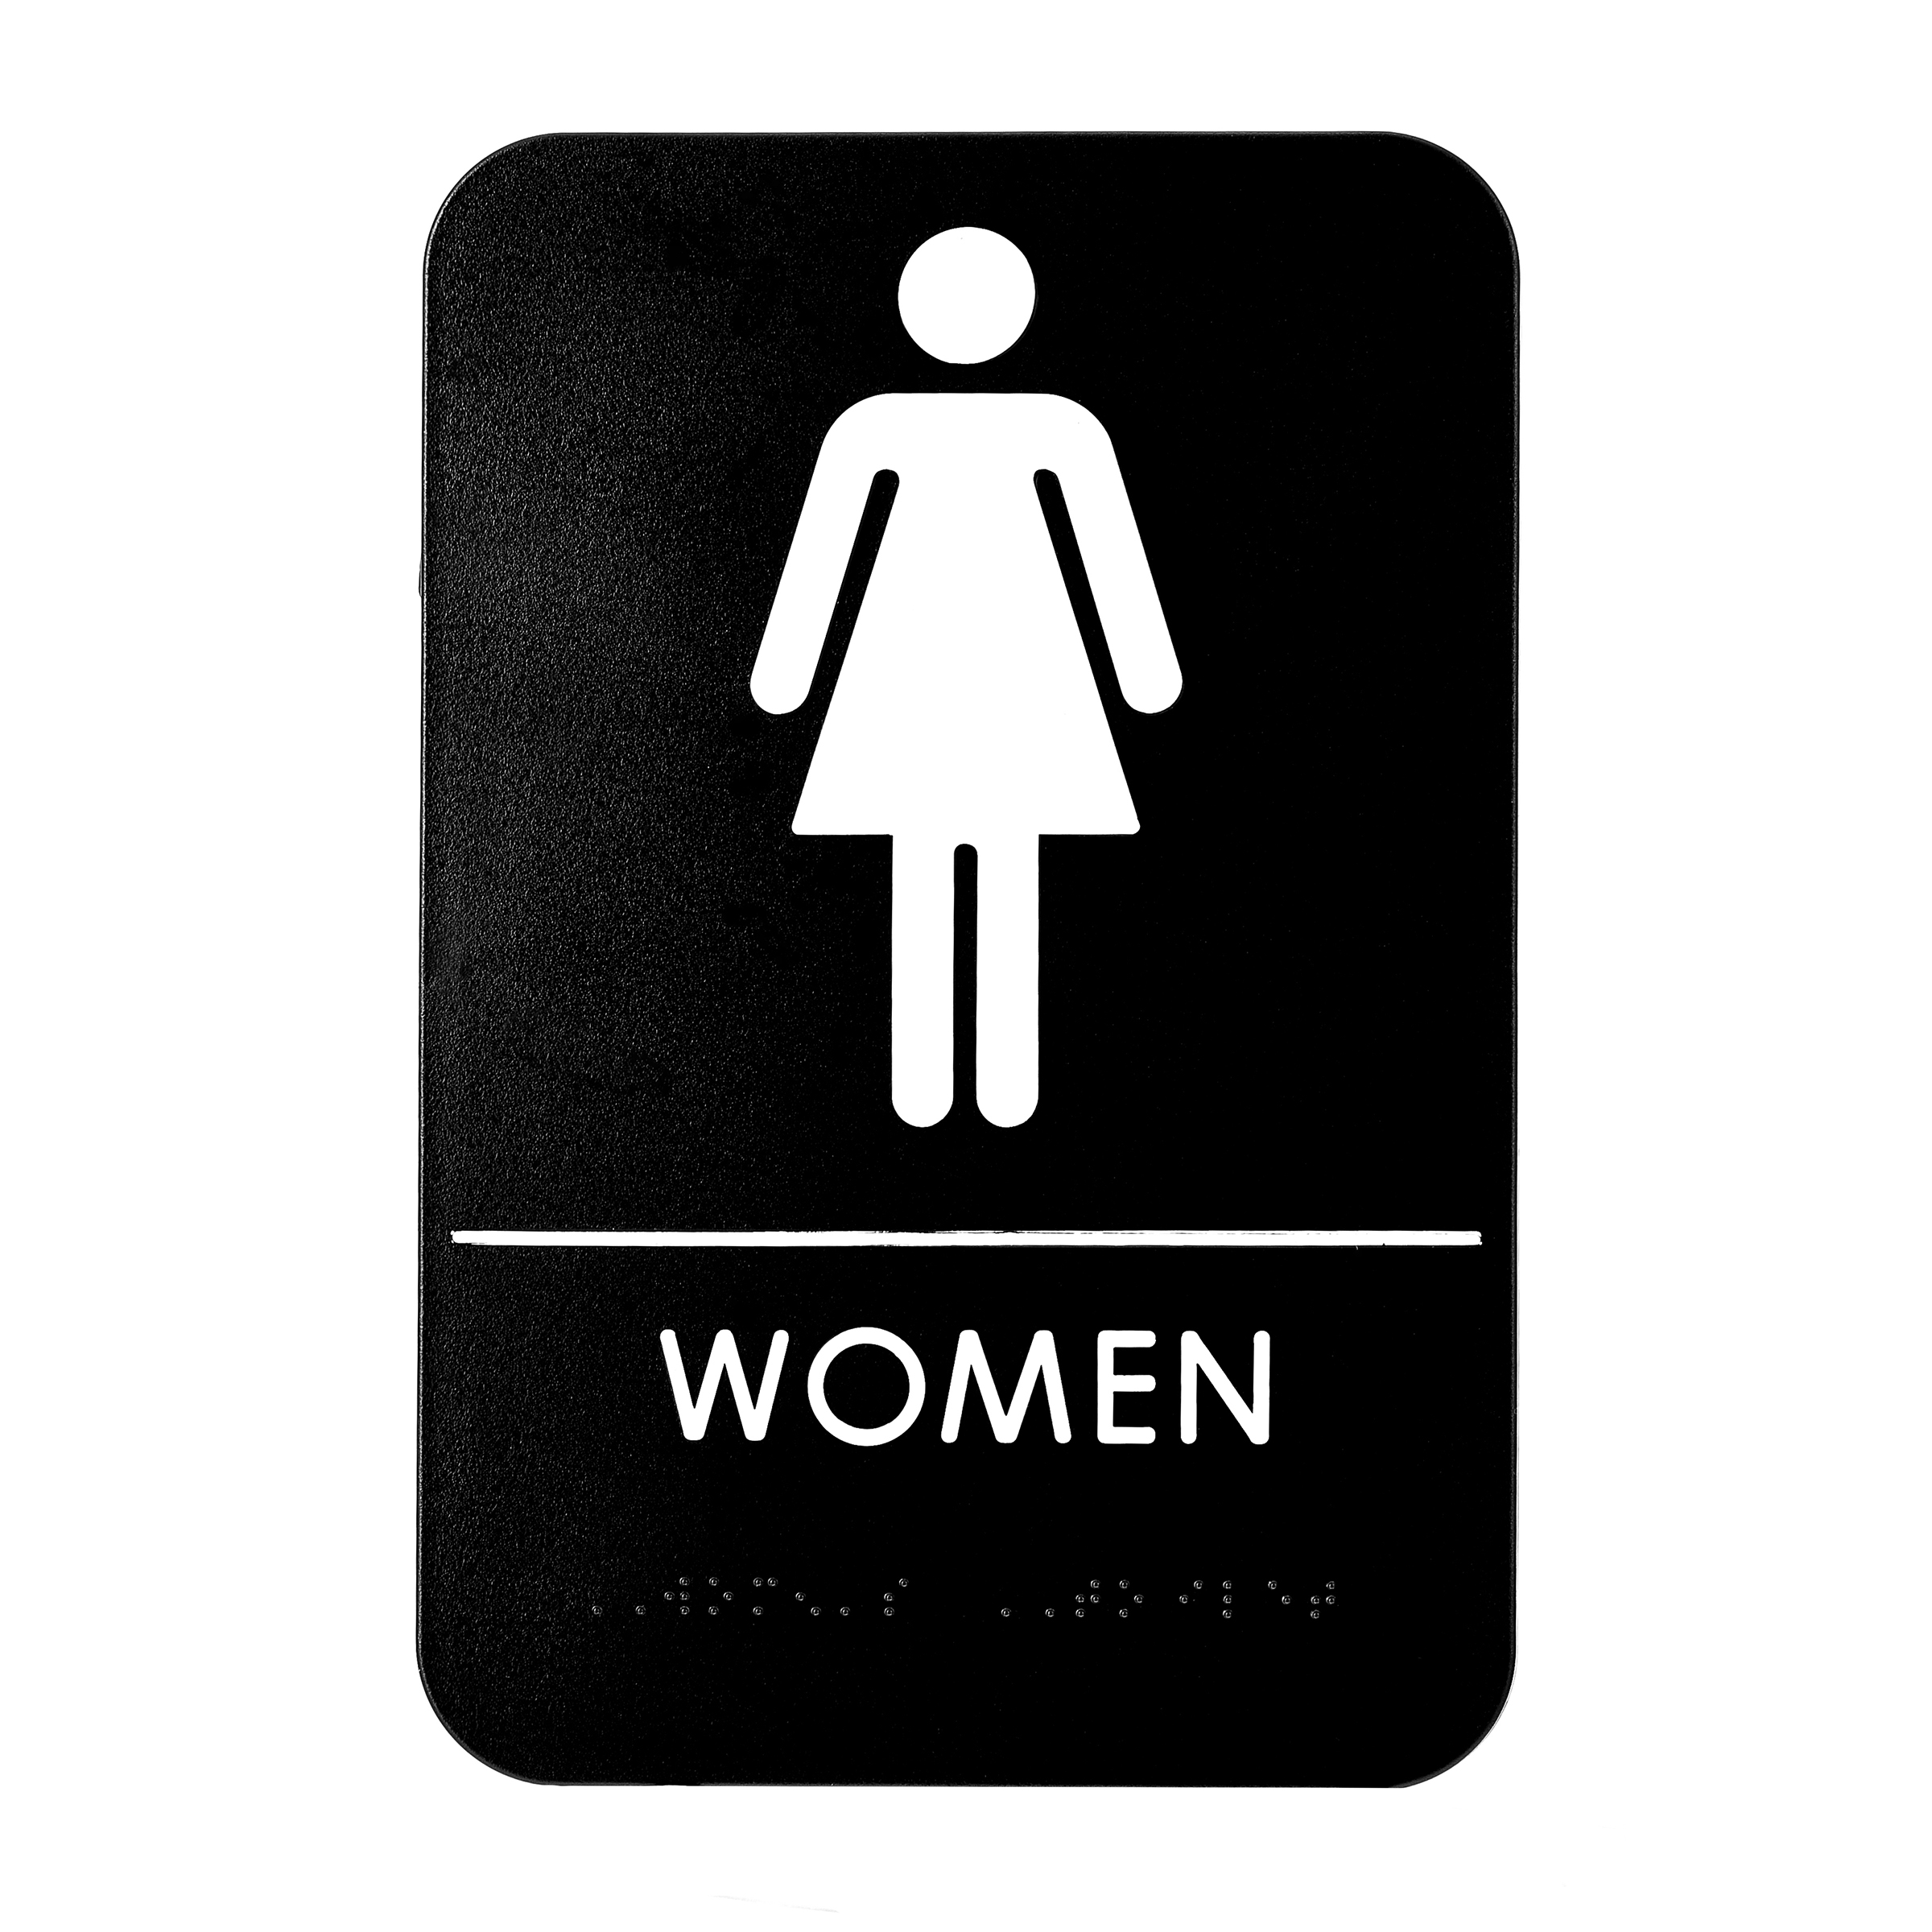 Set of 2 Alpine Industries Mens & Womens Restroom Signs Durable Self Adhesive Back & White Handicapped Bathroom Door Sign/Placard w/Braille Lettering for Business Office & Restaurant 